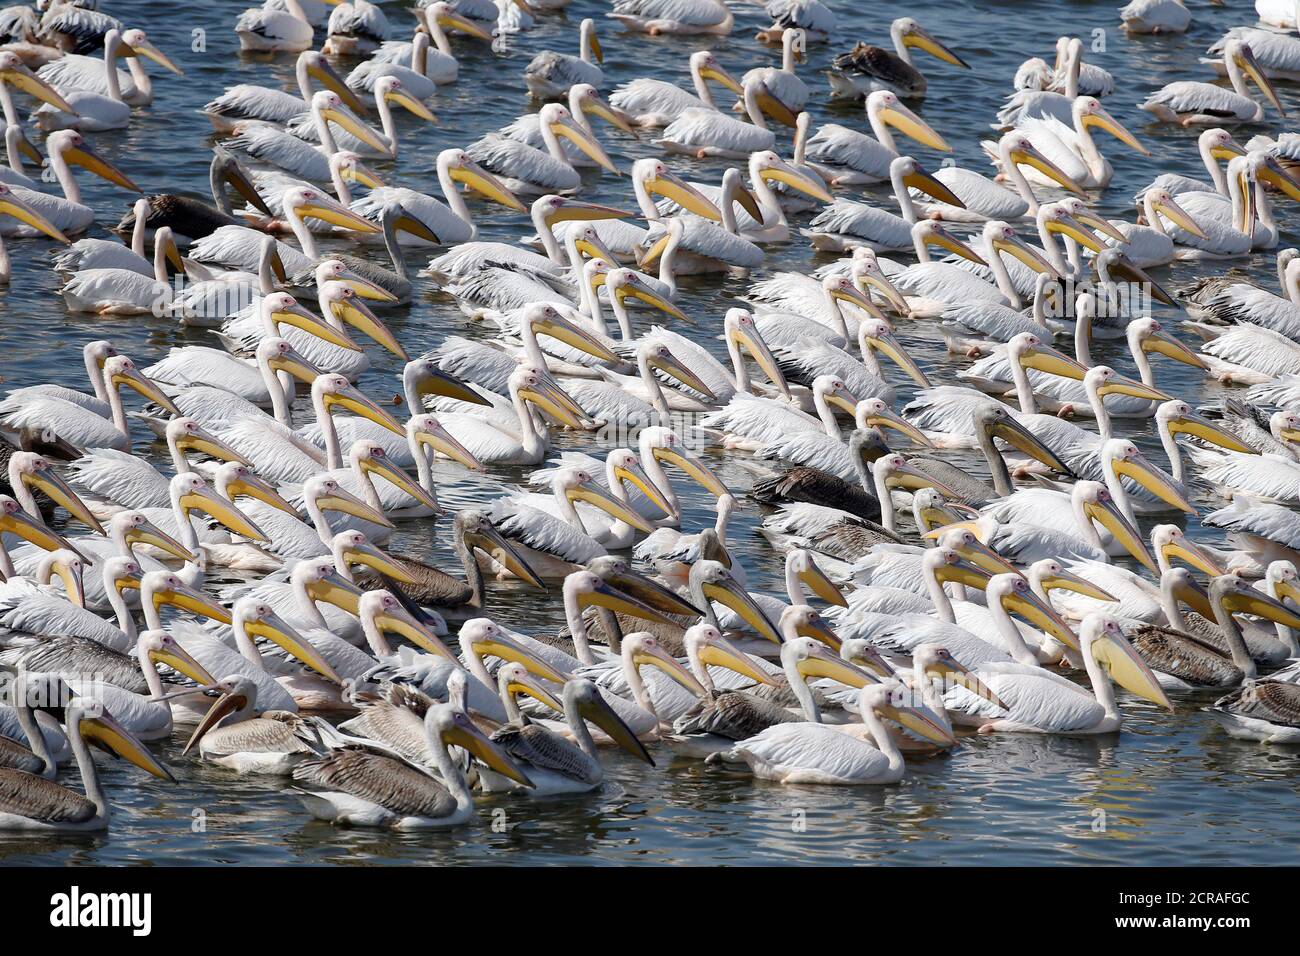 Great white pelicans stand in the water as they are fed by employees from Israel's nature and parks authority, during their migrating season, in Mishmar Hasharon, Israel October 13, 2016. REUTERS/Baz Ratner Stock Photo